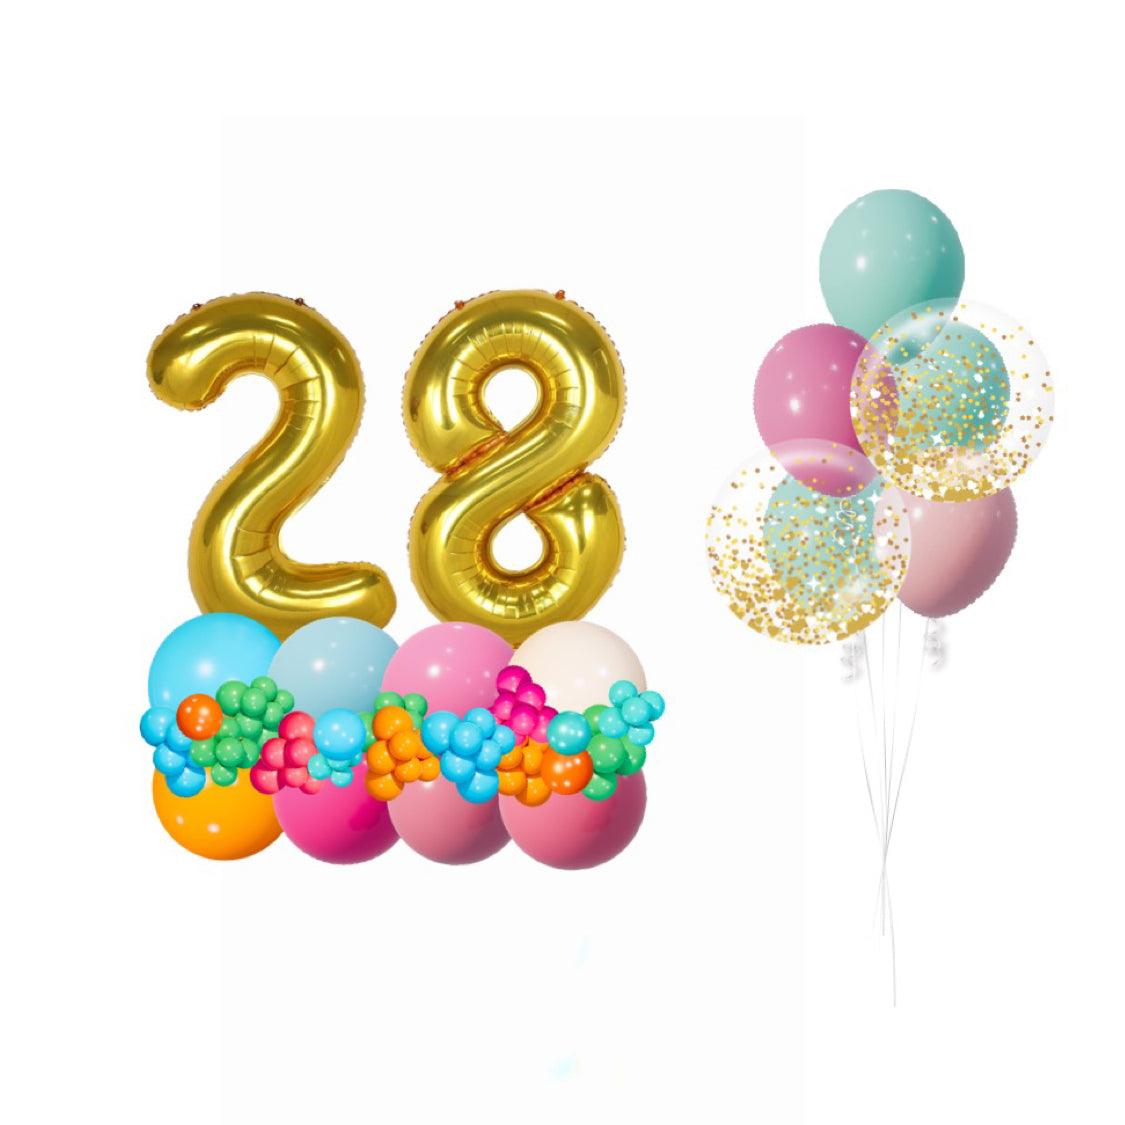 TROPICAL TIME - CONFETTI BOUQUET & NUMBER PEDESTALS SET - ONE UP BALLOONS